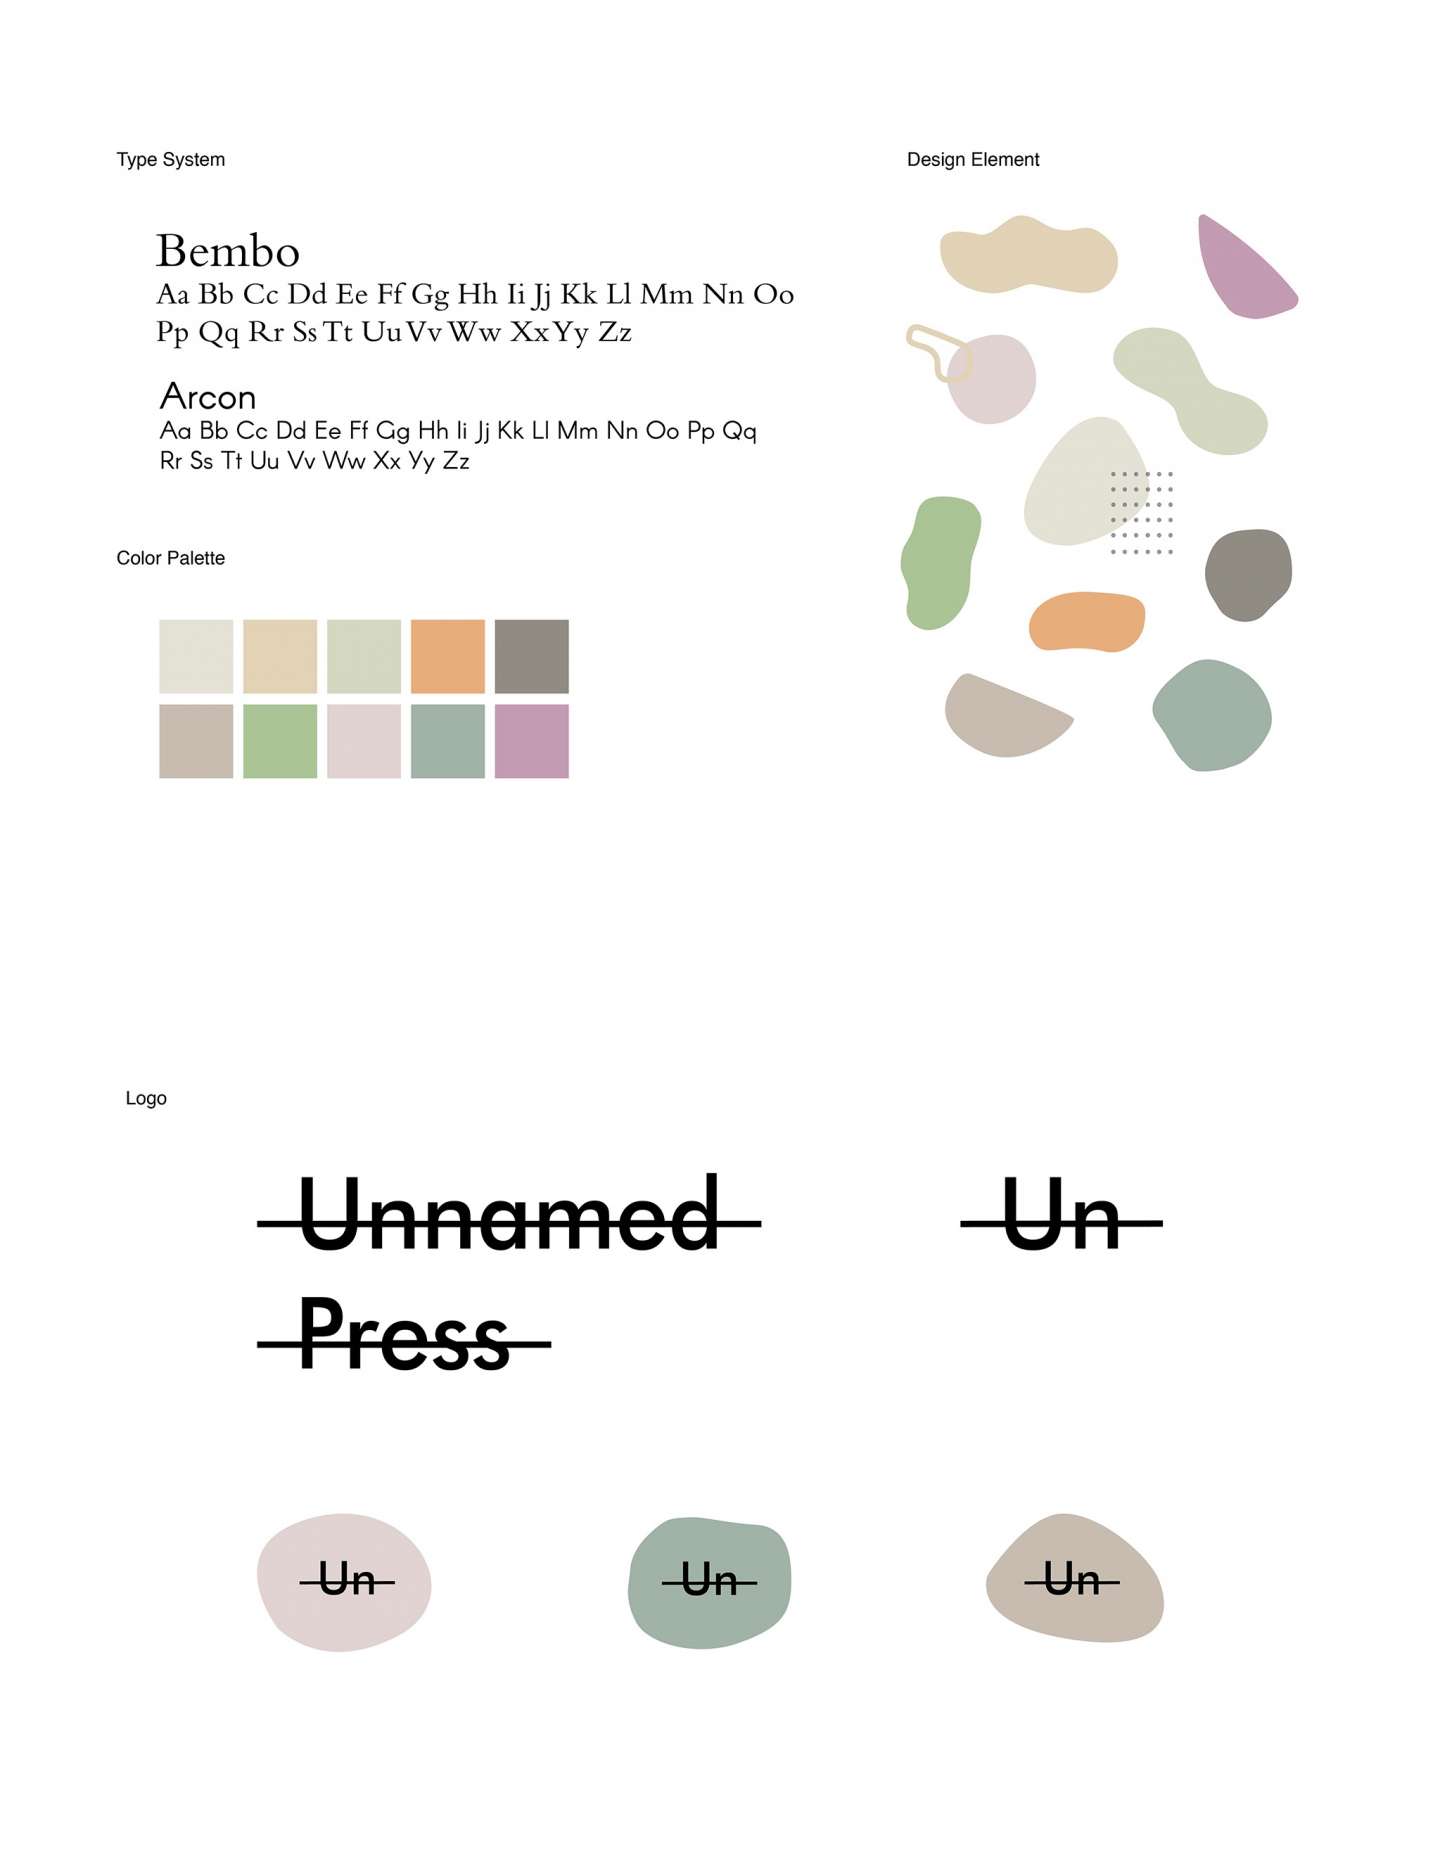 Unnamed Press